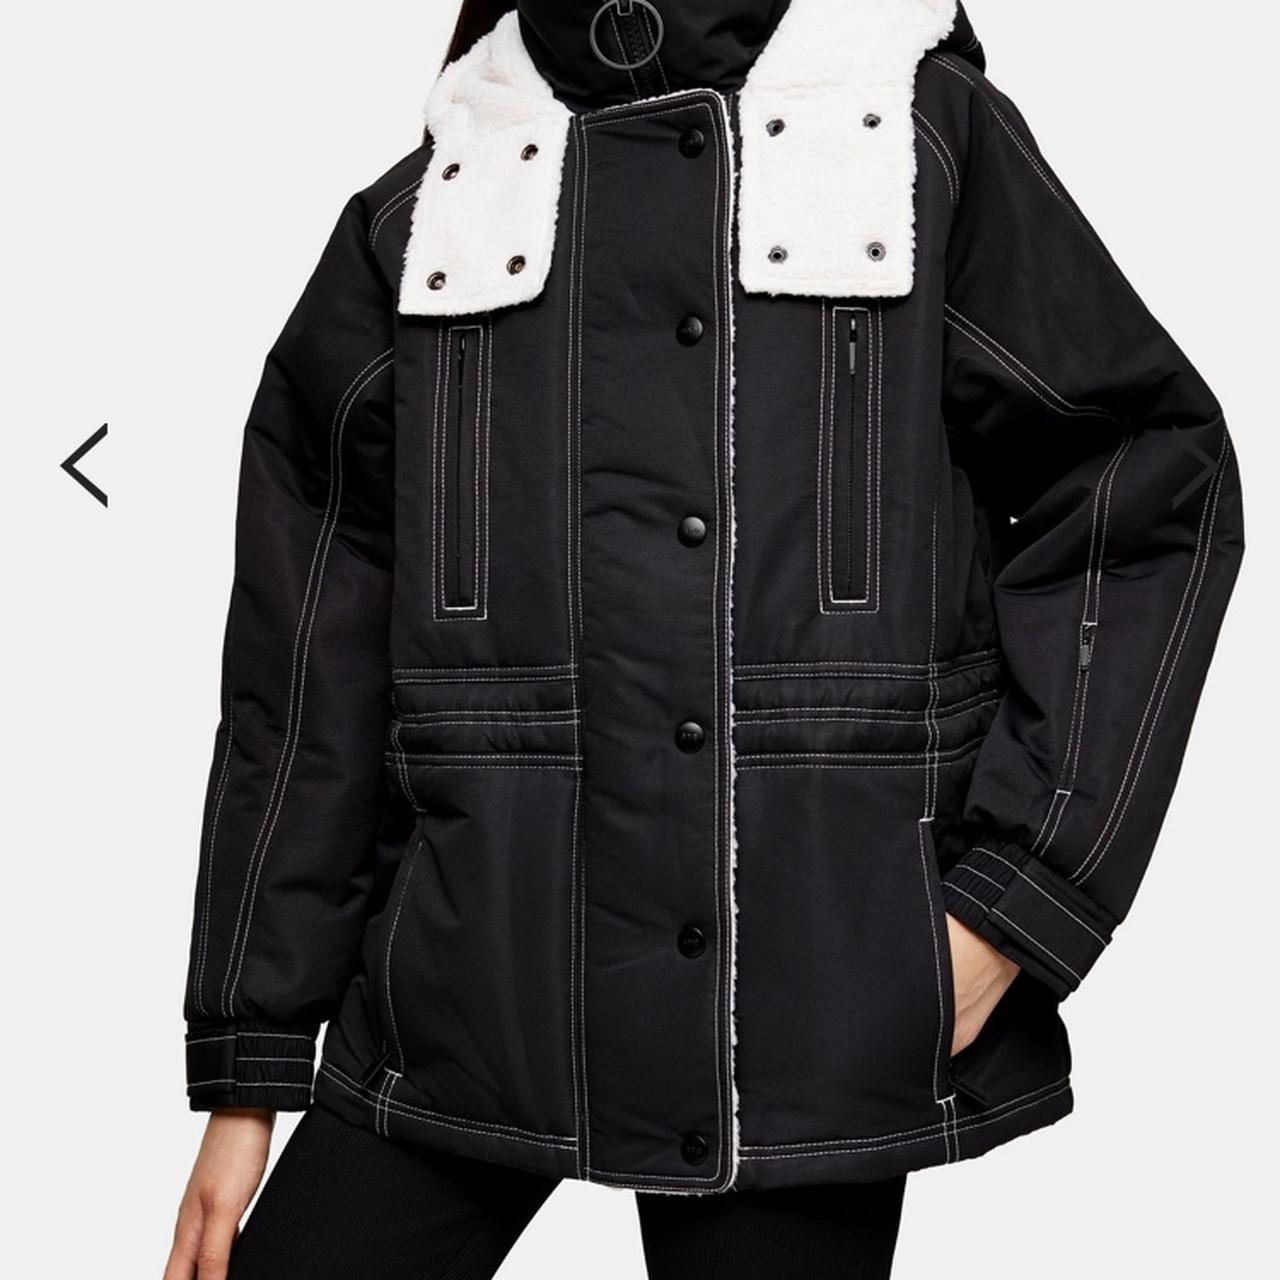 Black And White Ski Jacket By Topshop SNO - 135€ #theradicalblog  #winteroutfits #topshop